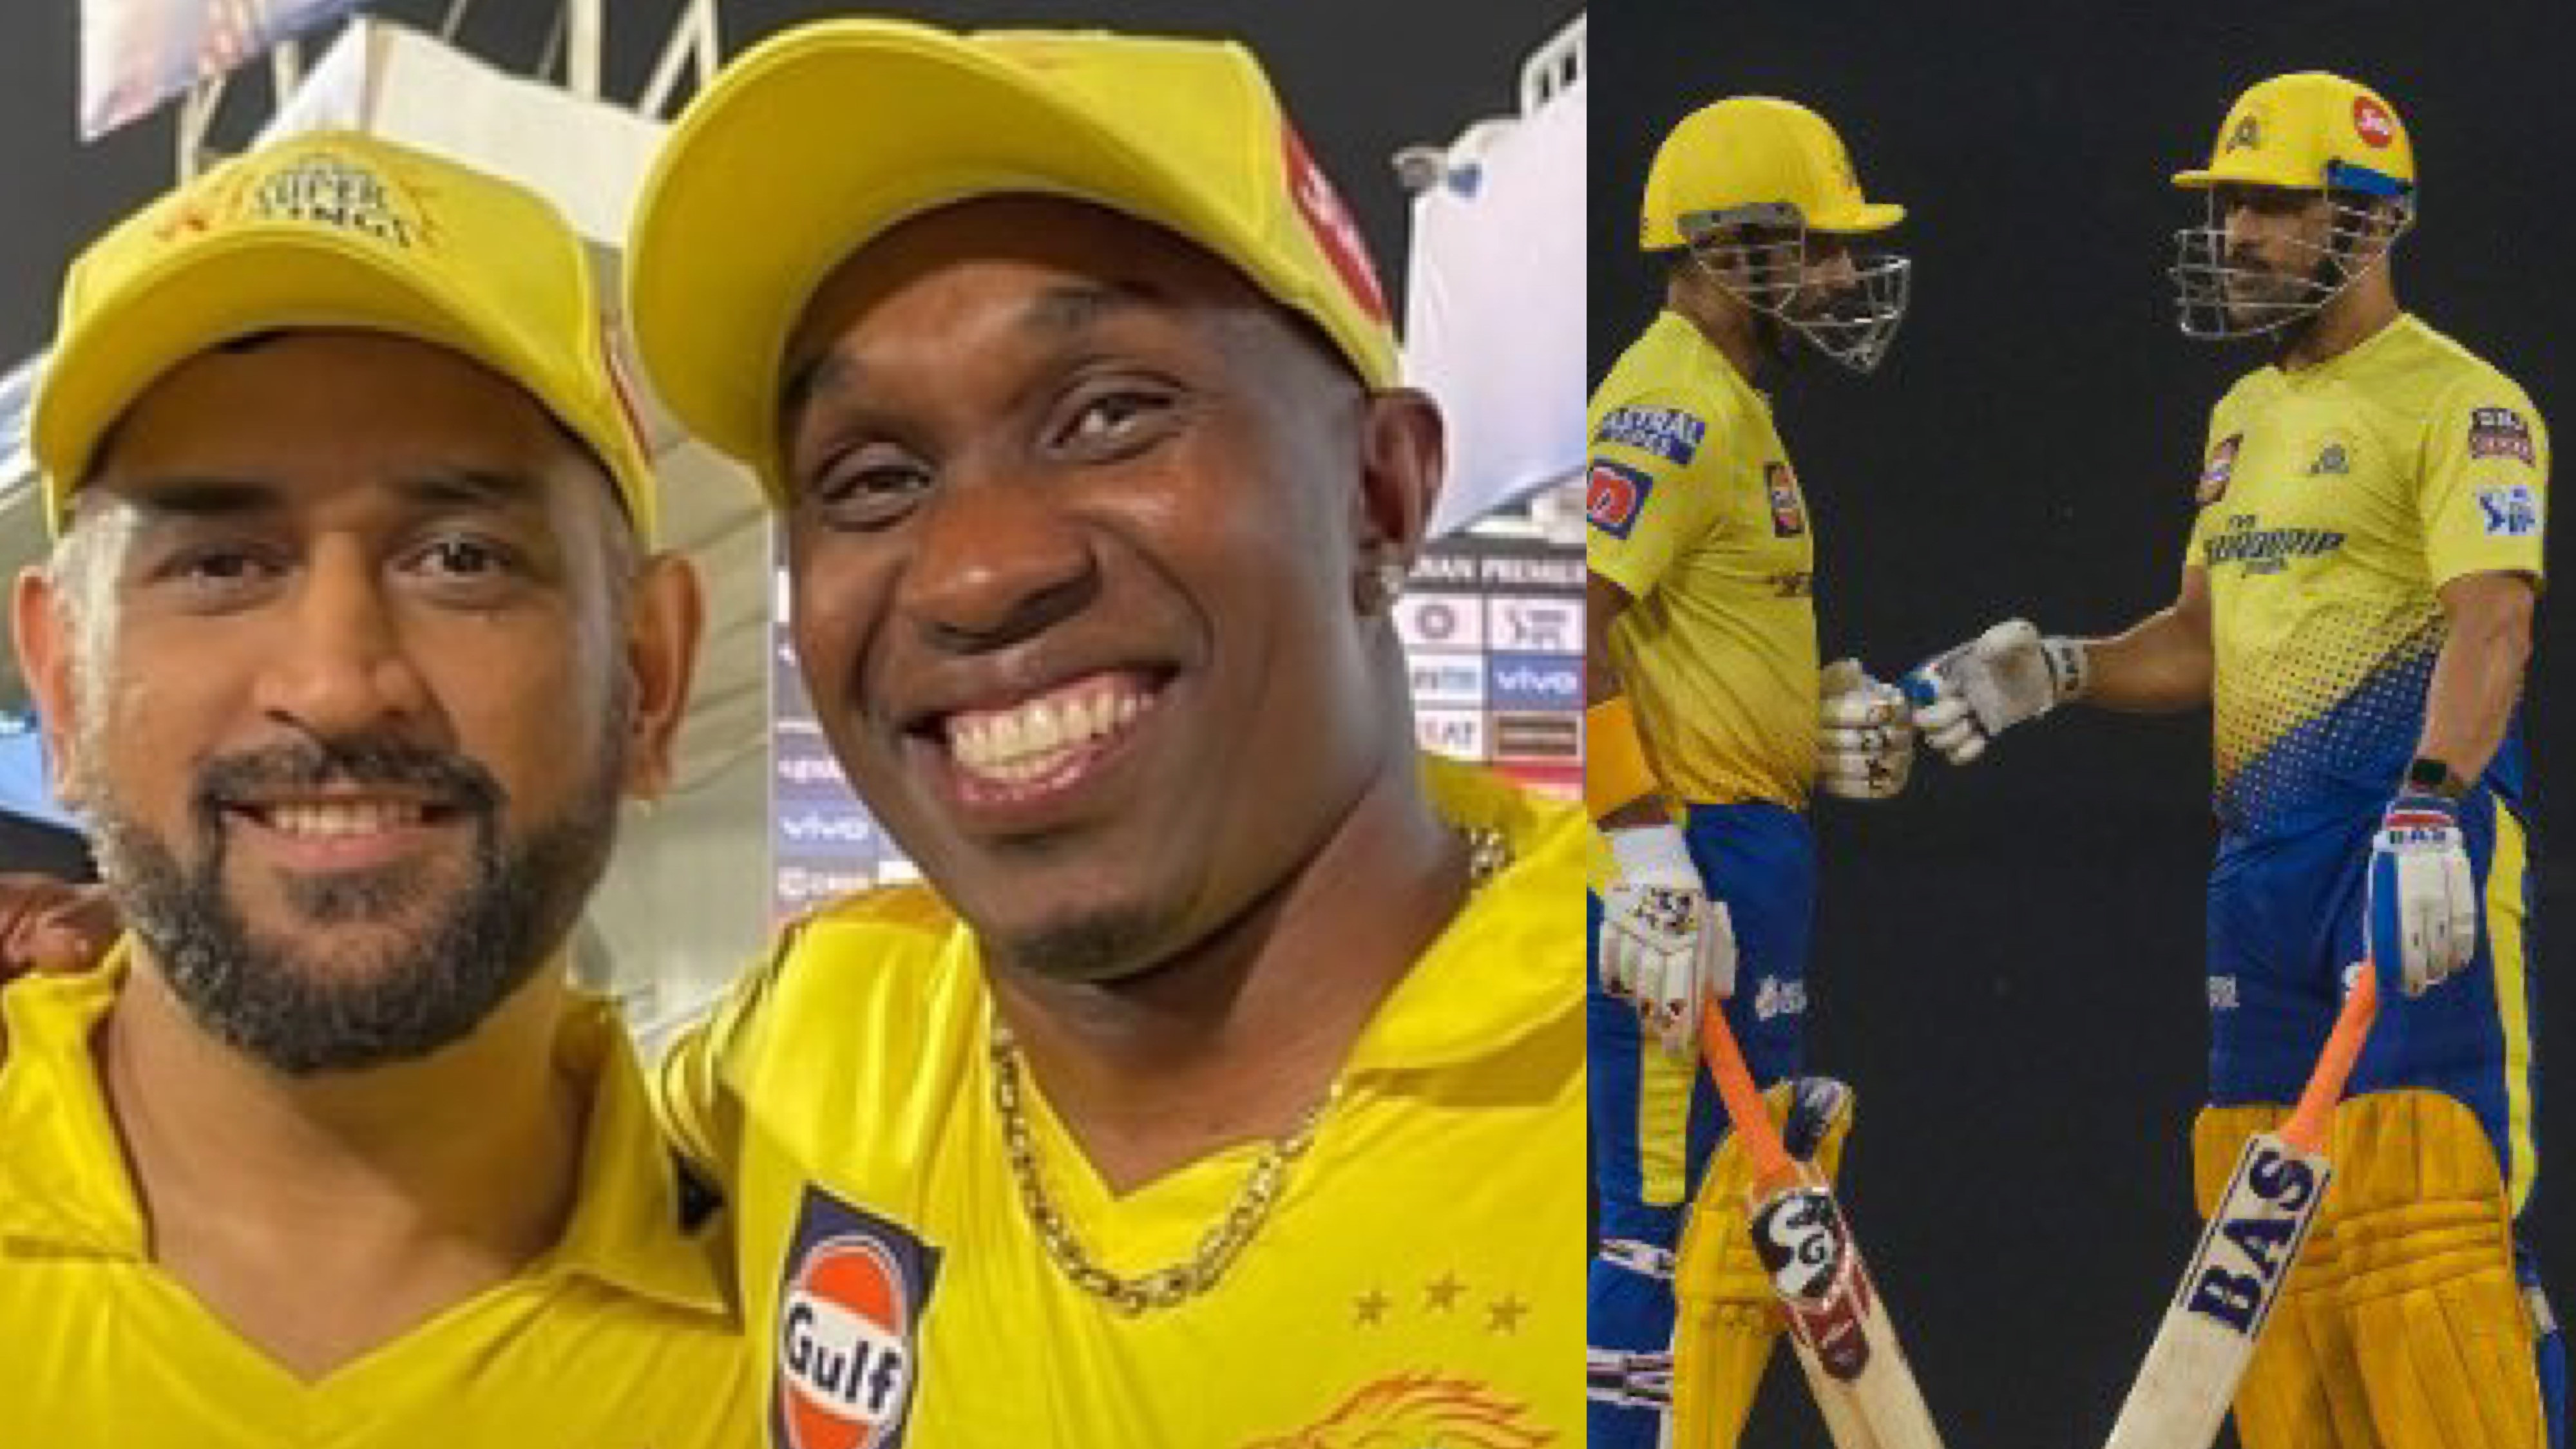 IPL 2022: “Your legacy as CSK captain will live on forever” Bravo, Uthappa applaud Dhoni’s captaincy tenure